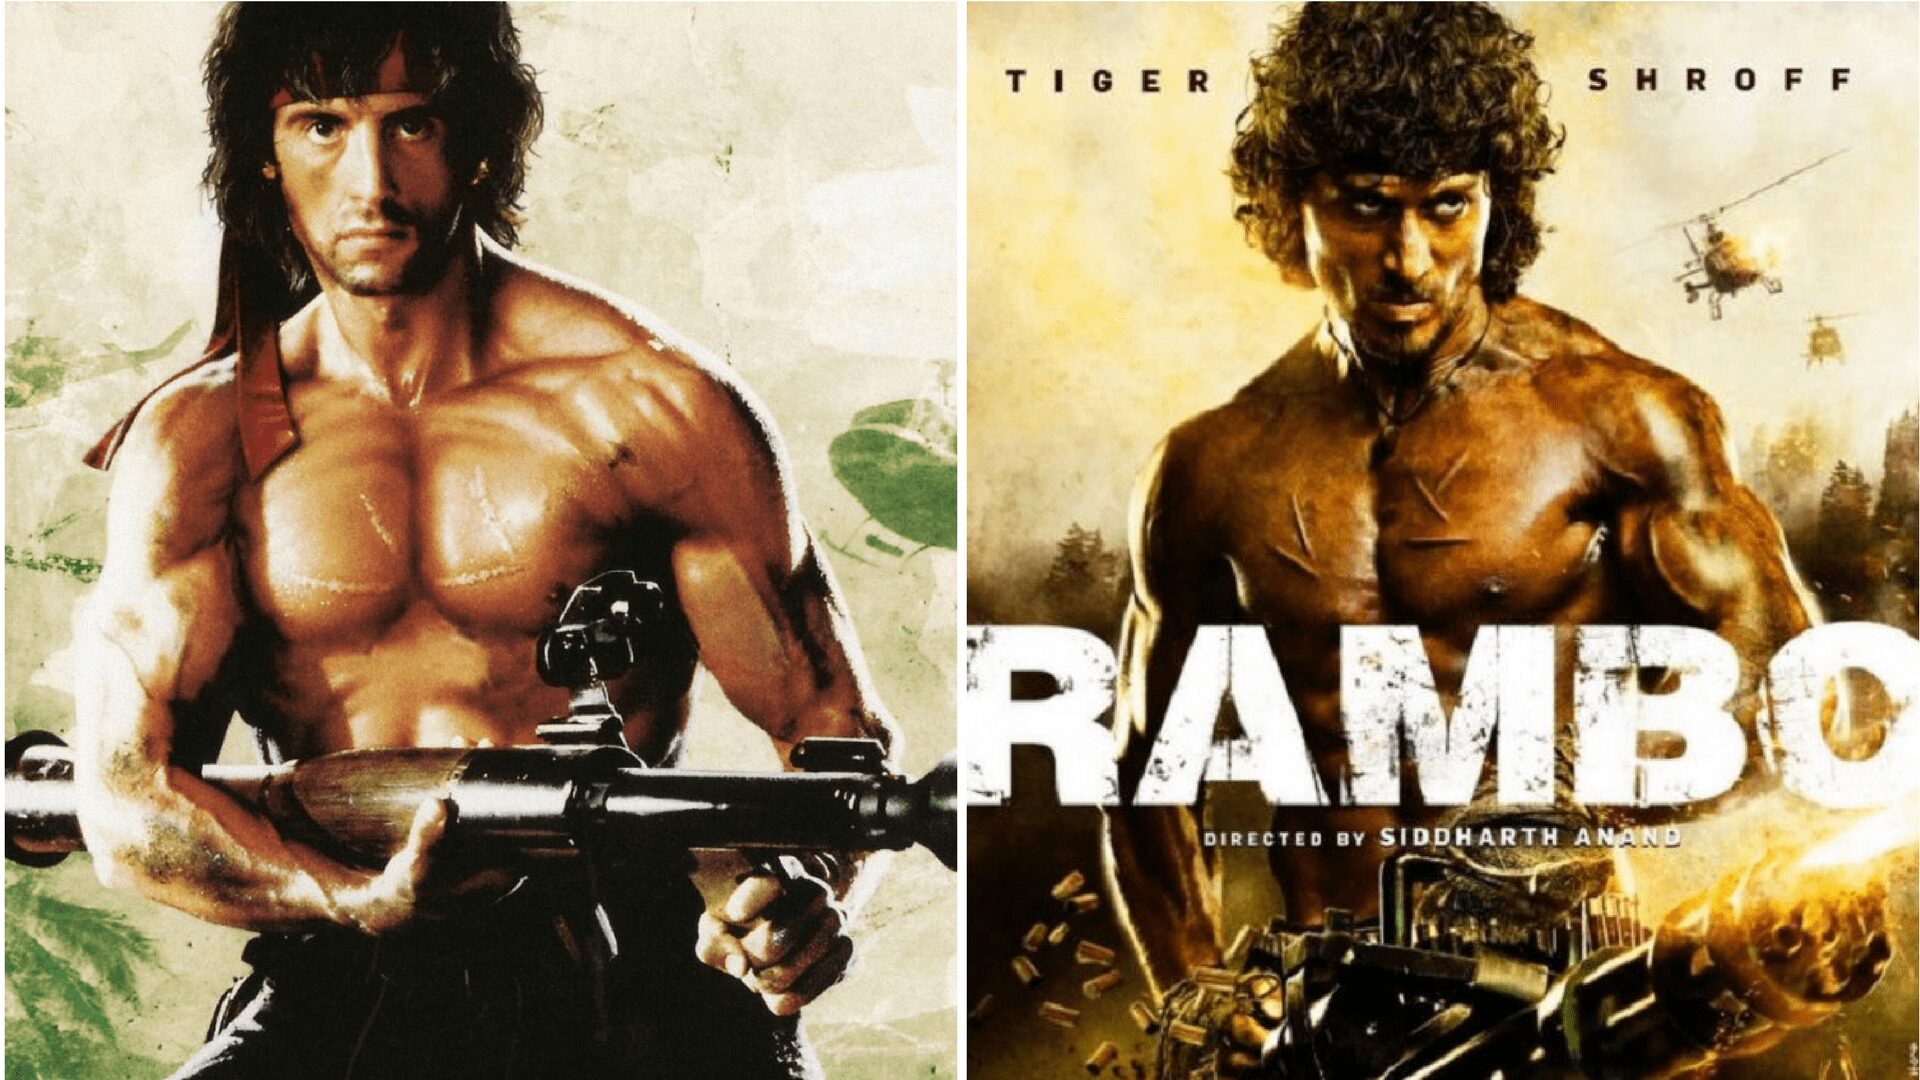 Bollywood Rambo gets Stallone’s Approval